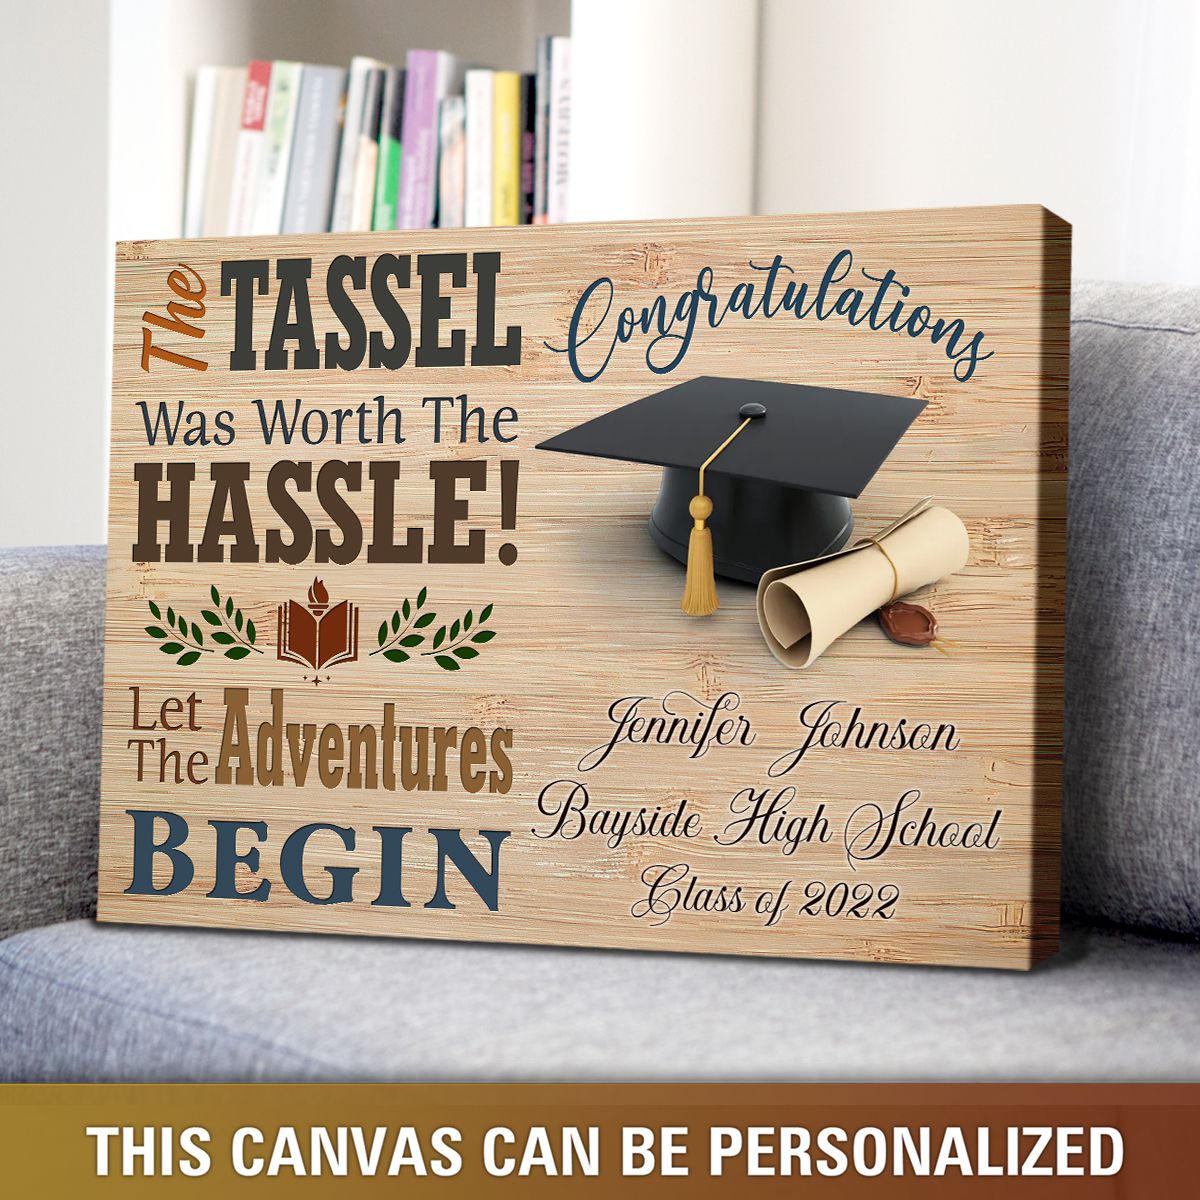 https://images.ohcanvas.com/ohcanvas_com/2022/06/12194652/graduation-gift-ideas-personalized-graduation-gifts-gift-for-a-graduate-student02.jpg